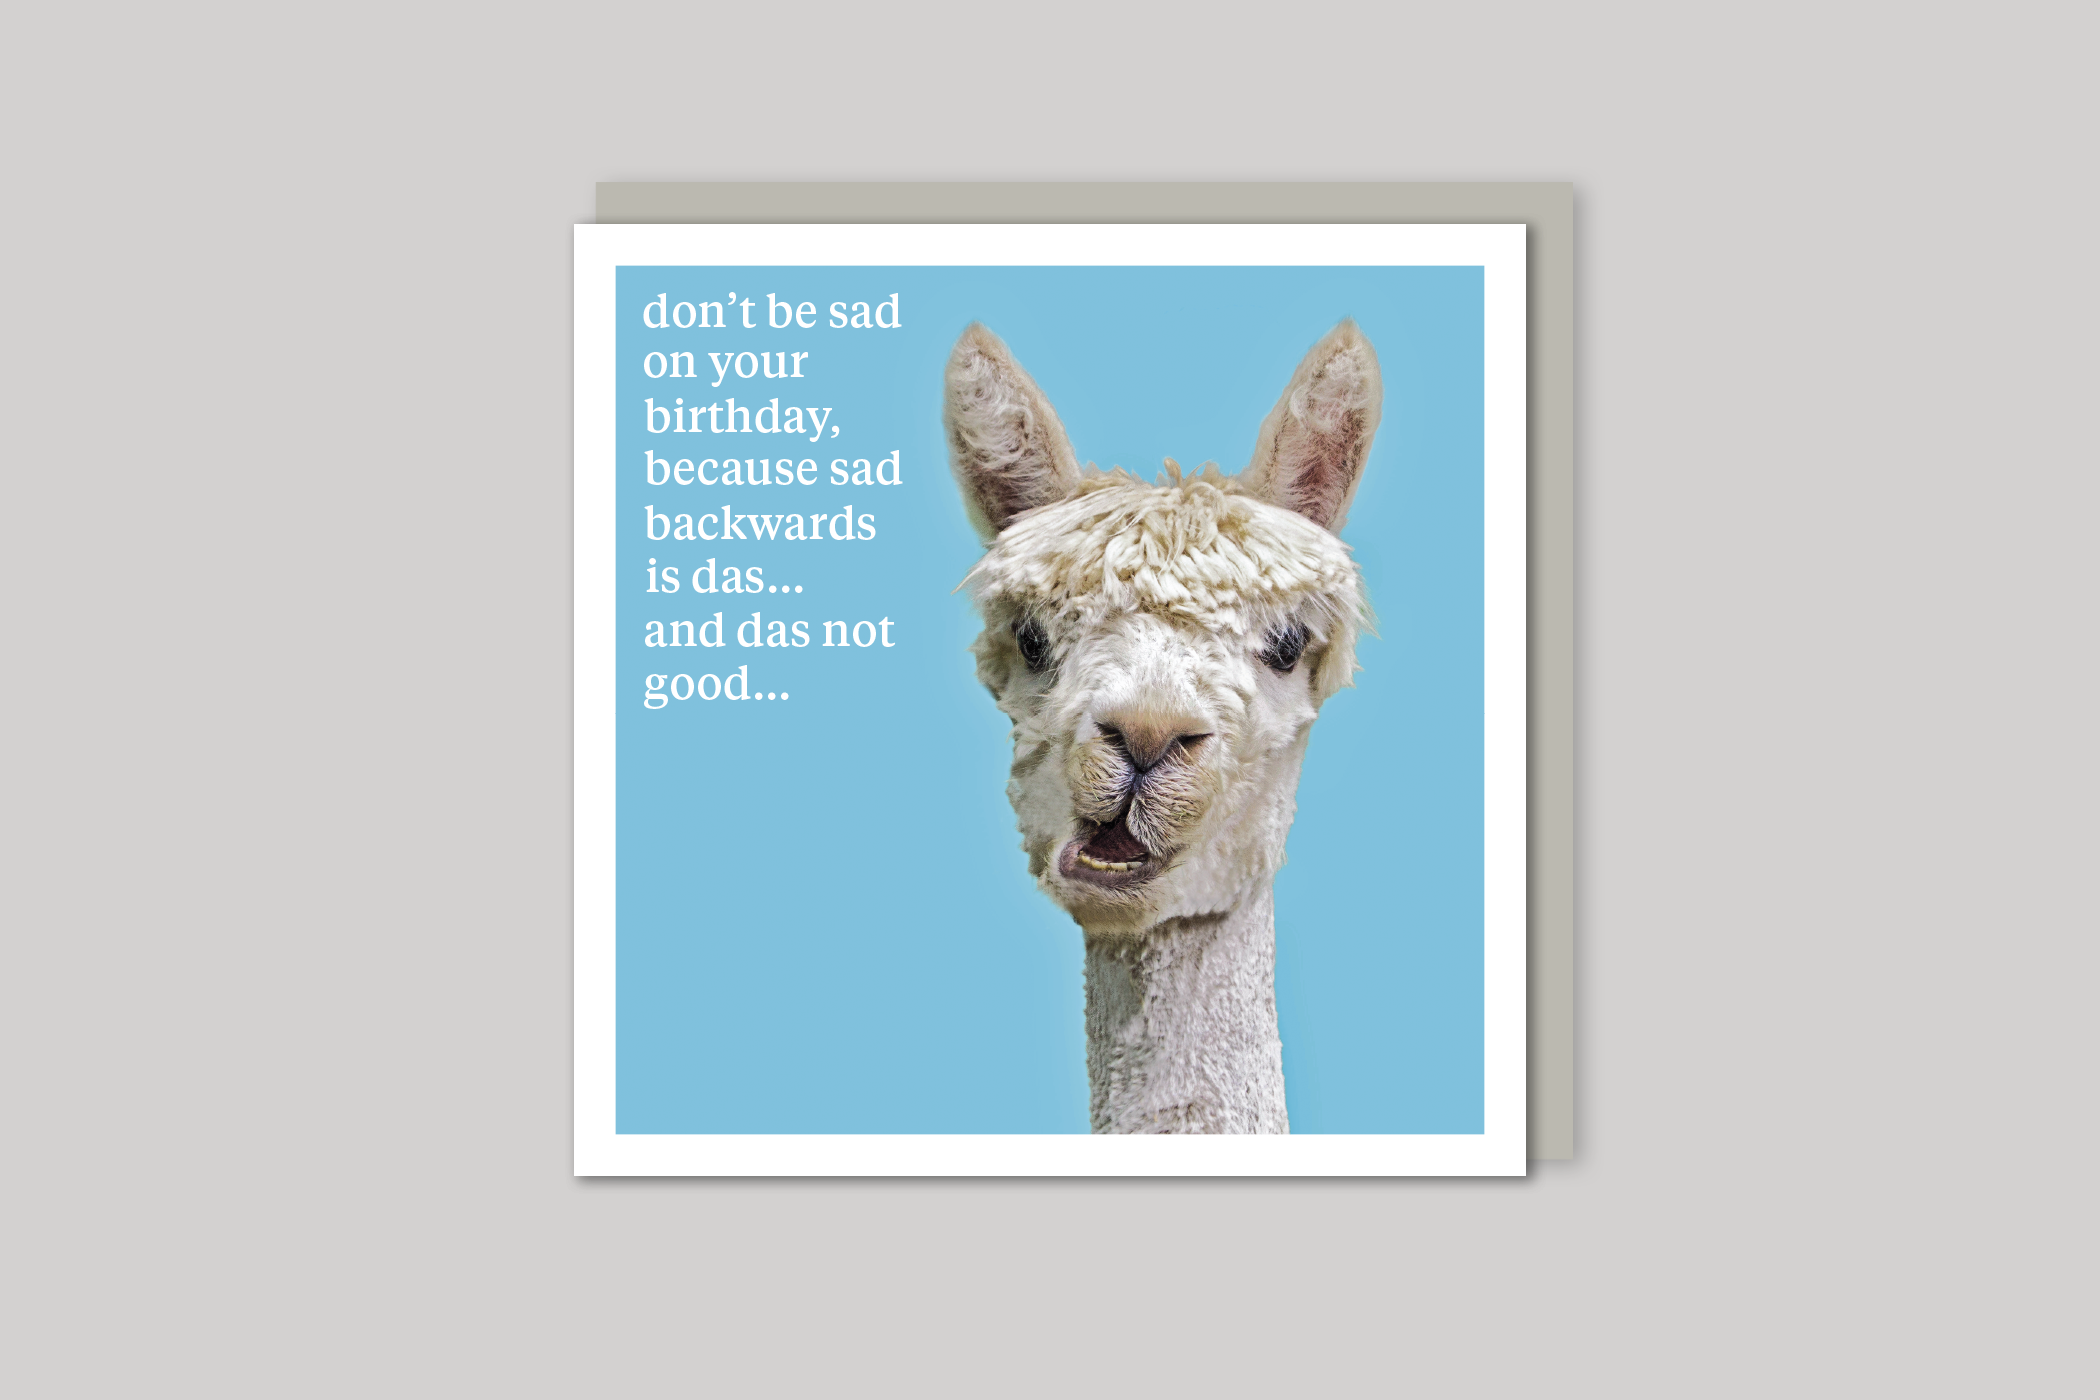 Don't Be Sad quirky animal portrait from Curious World range of greeting cards by Icon, back page.